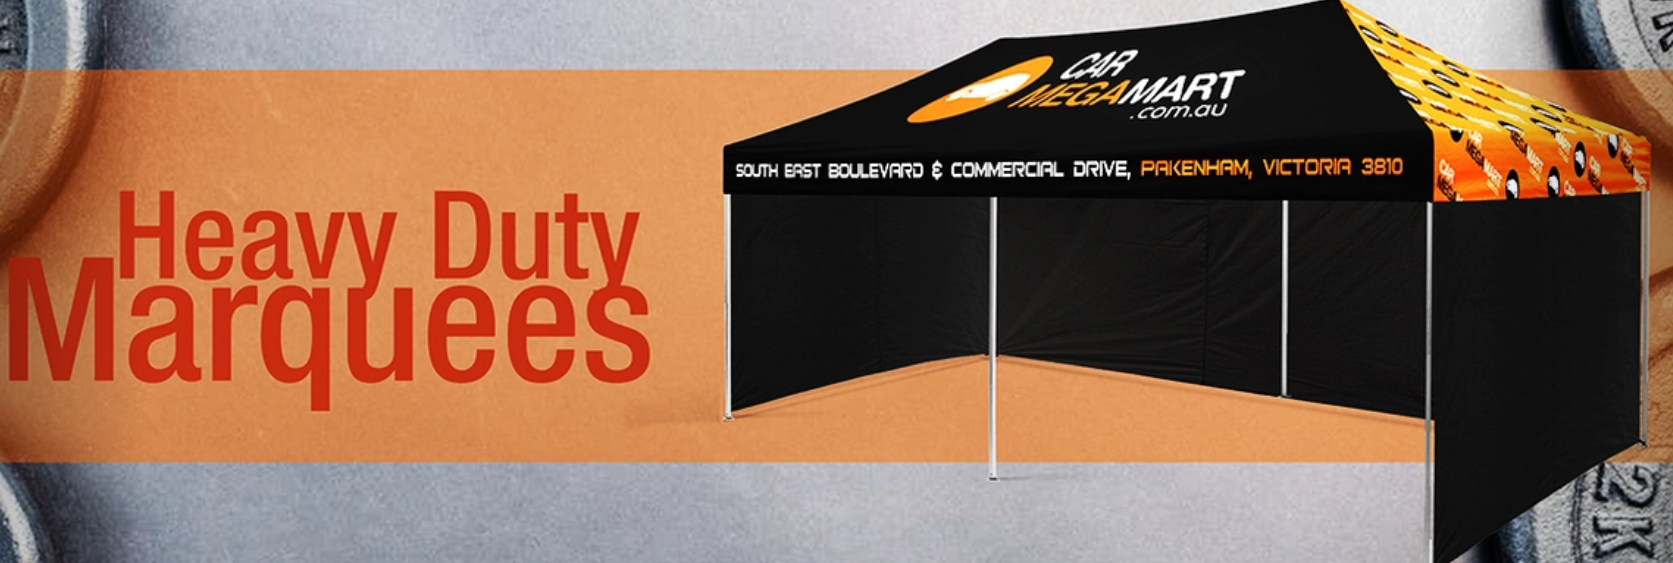 Outdoor Promotional Materials